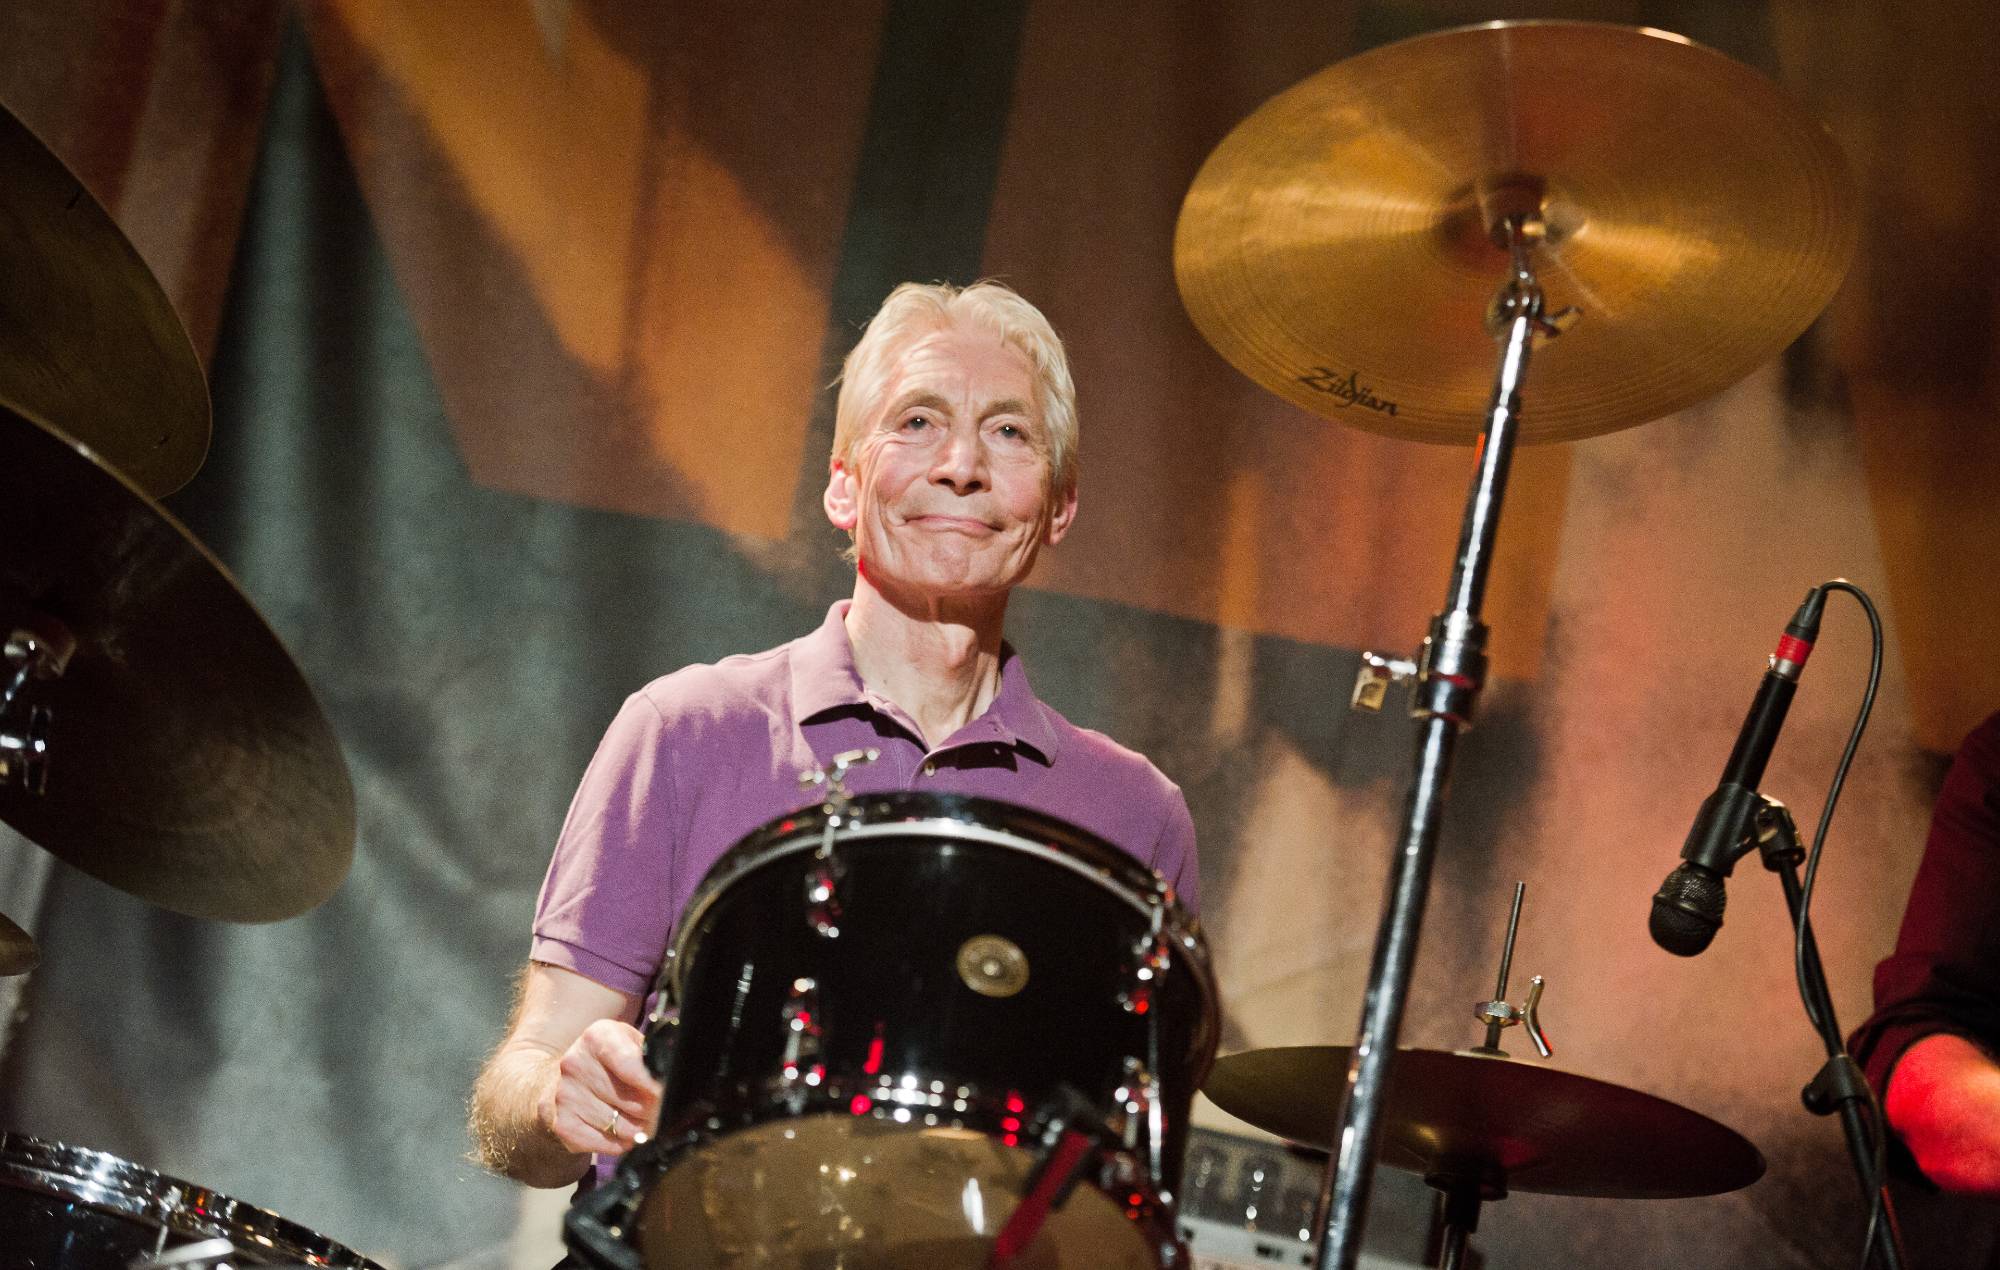 Revisit our 2018 video interview with late Rolling Stones legend Charlie Watts